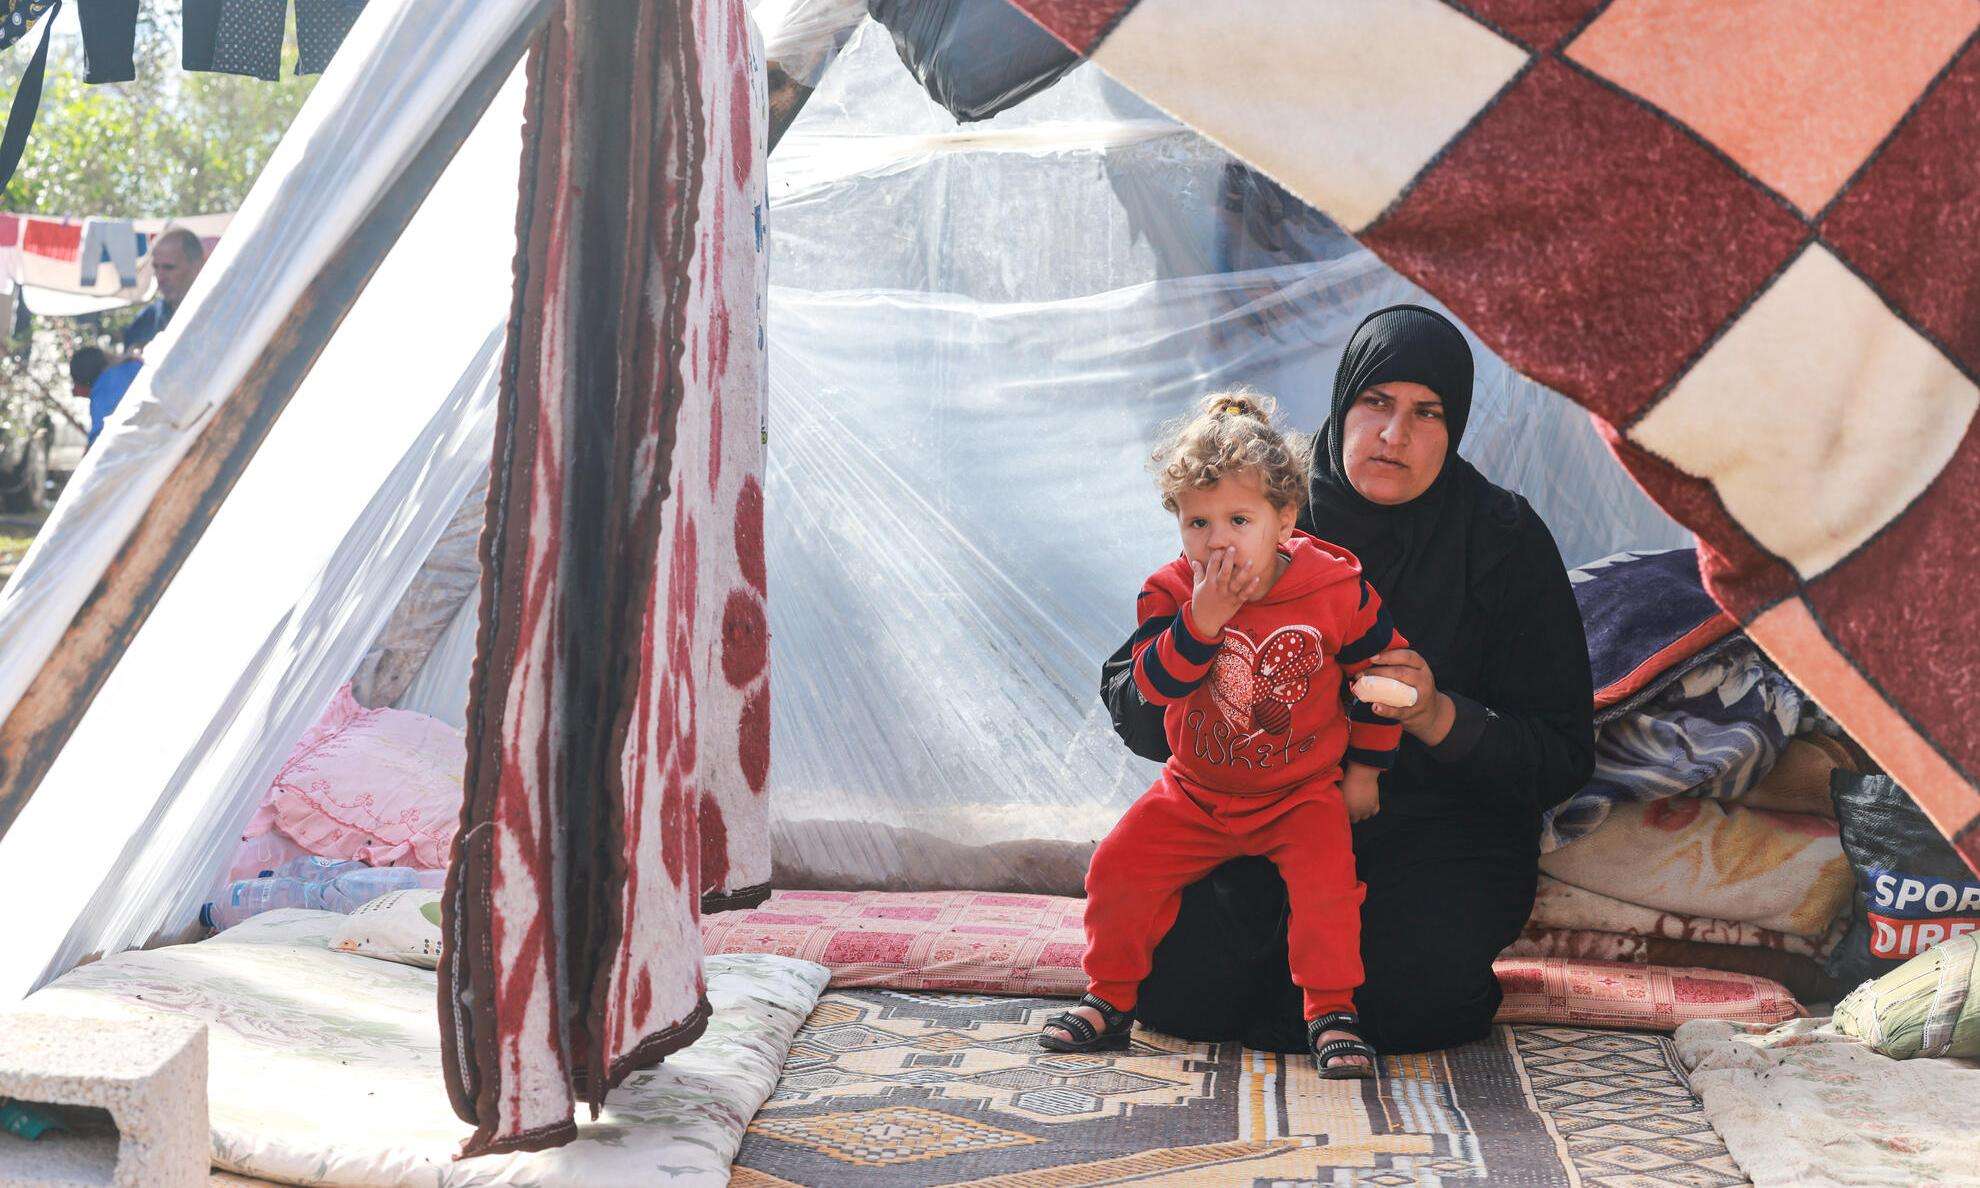 A woman and child in a shelter in Rafah, southern Gaza.